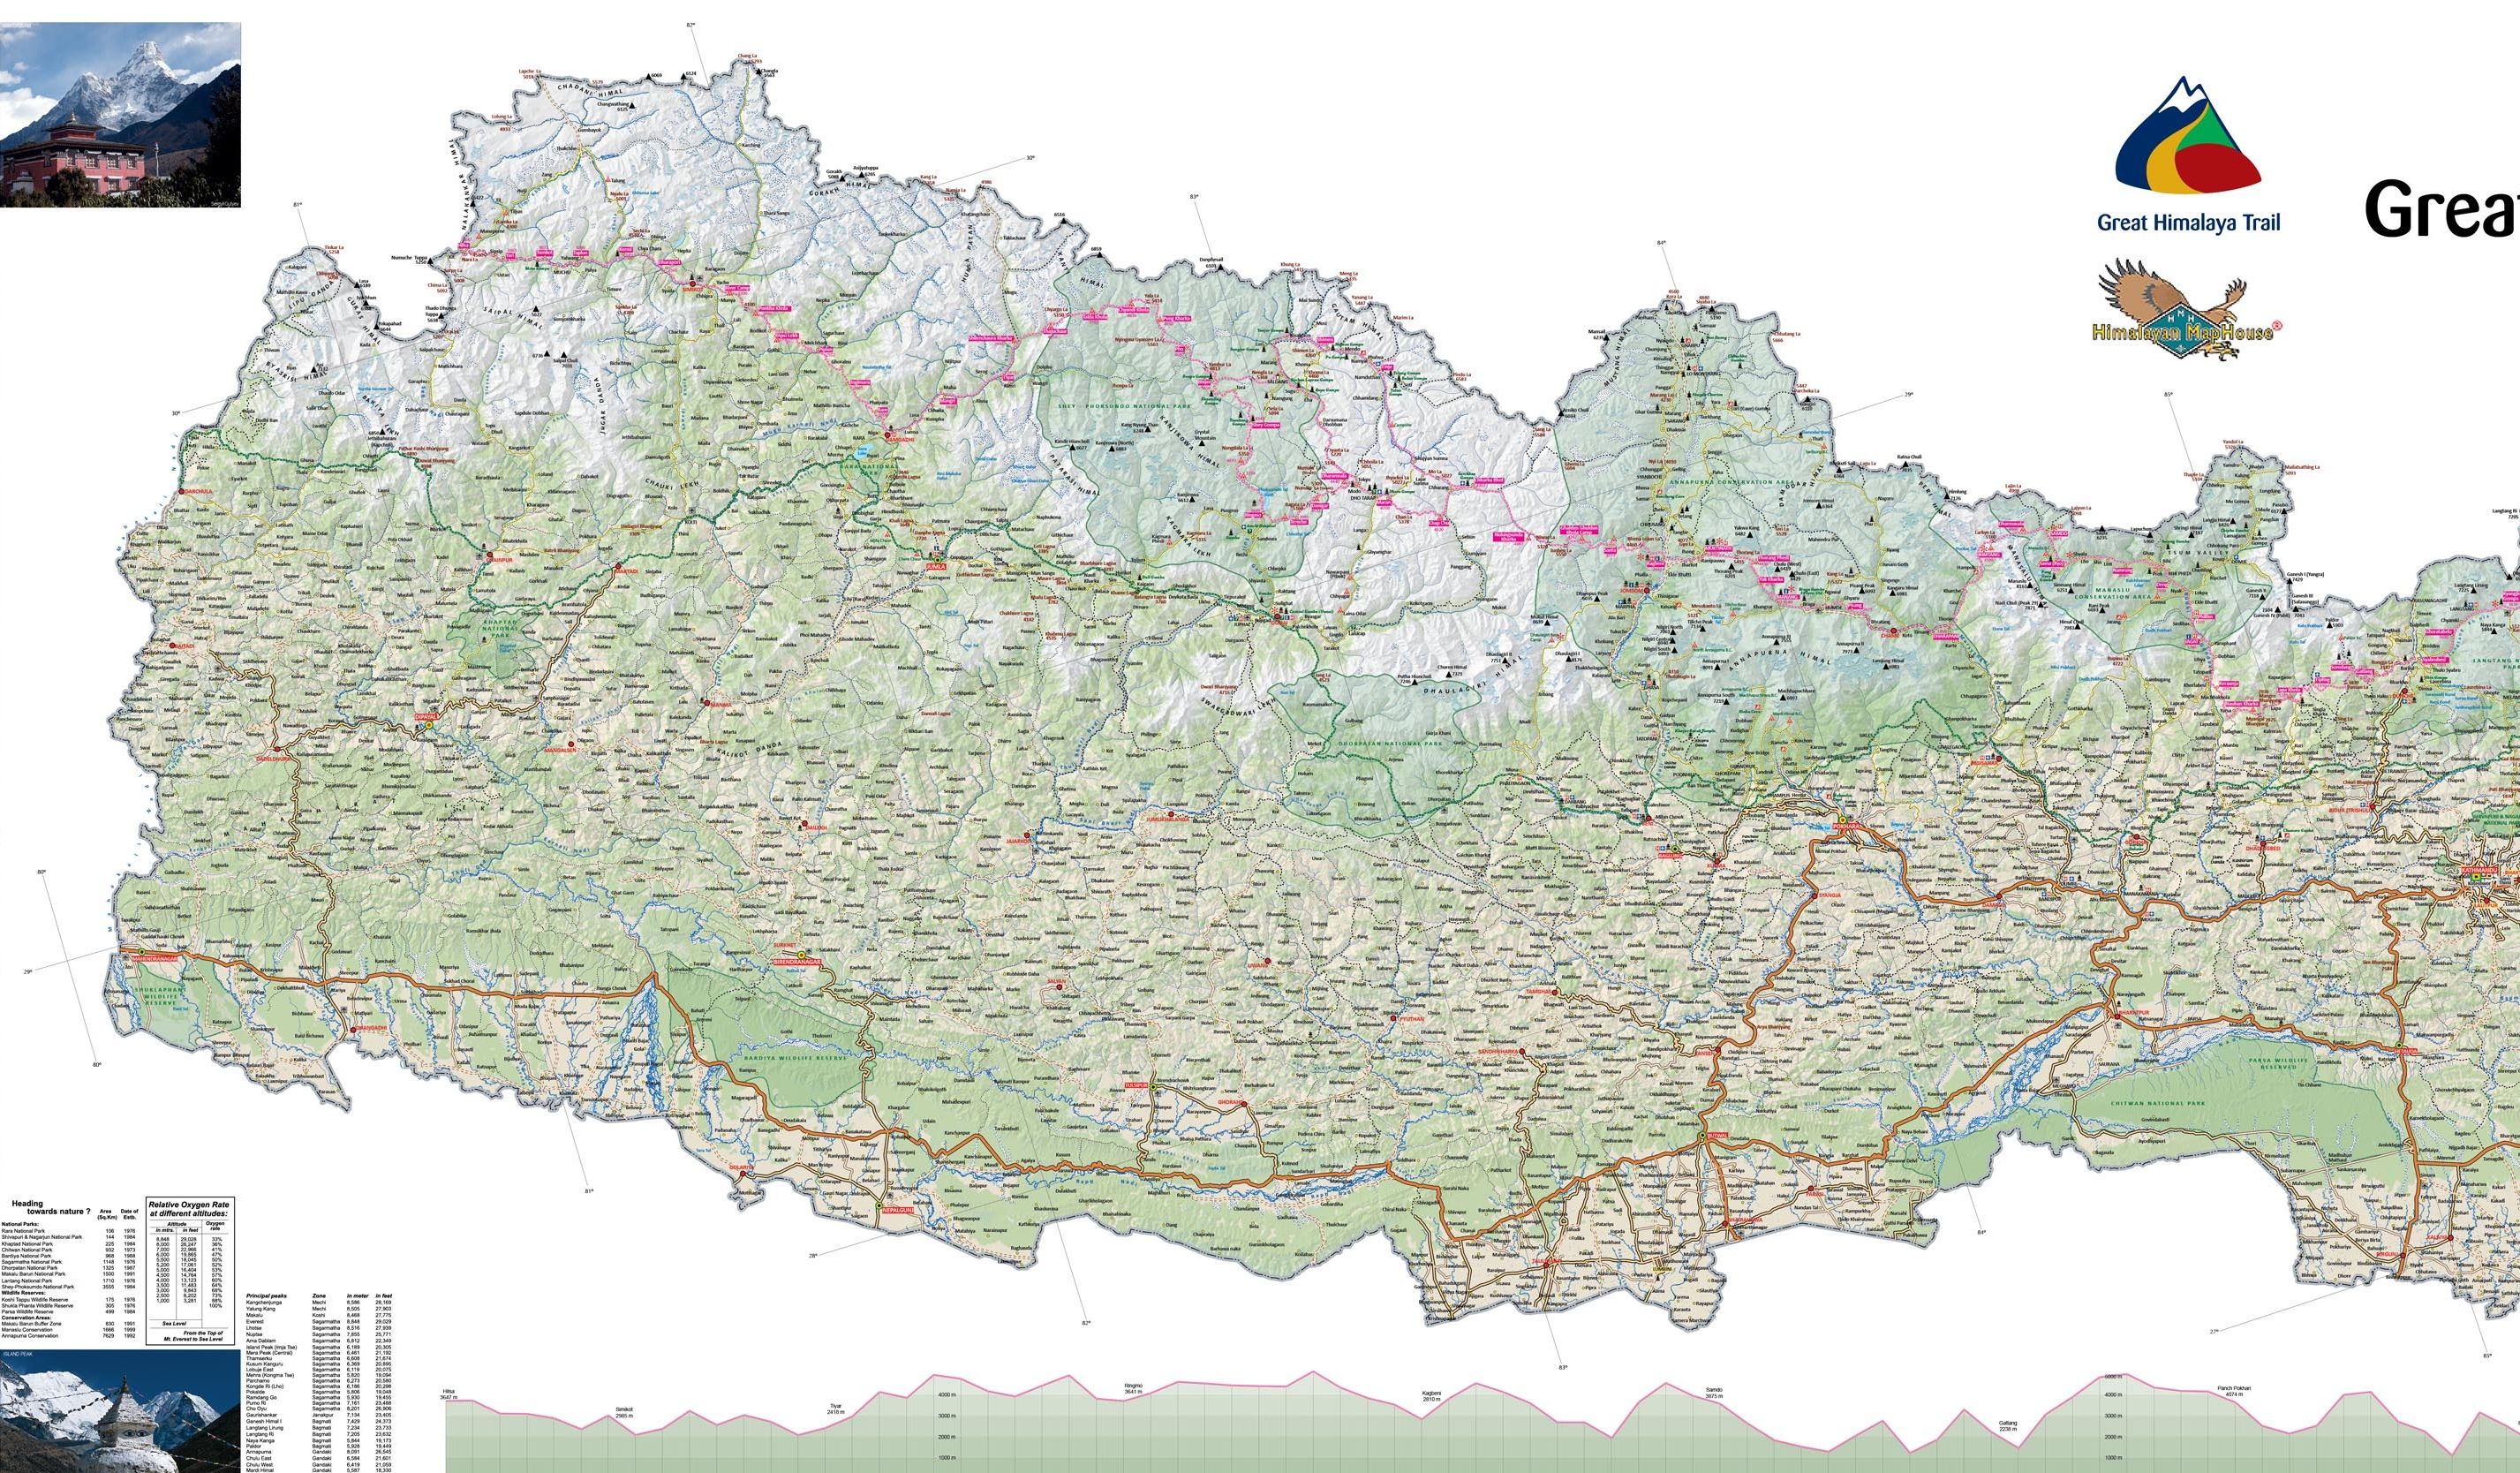 Map of the Great Himalayan Trail in Western Nepal